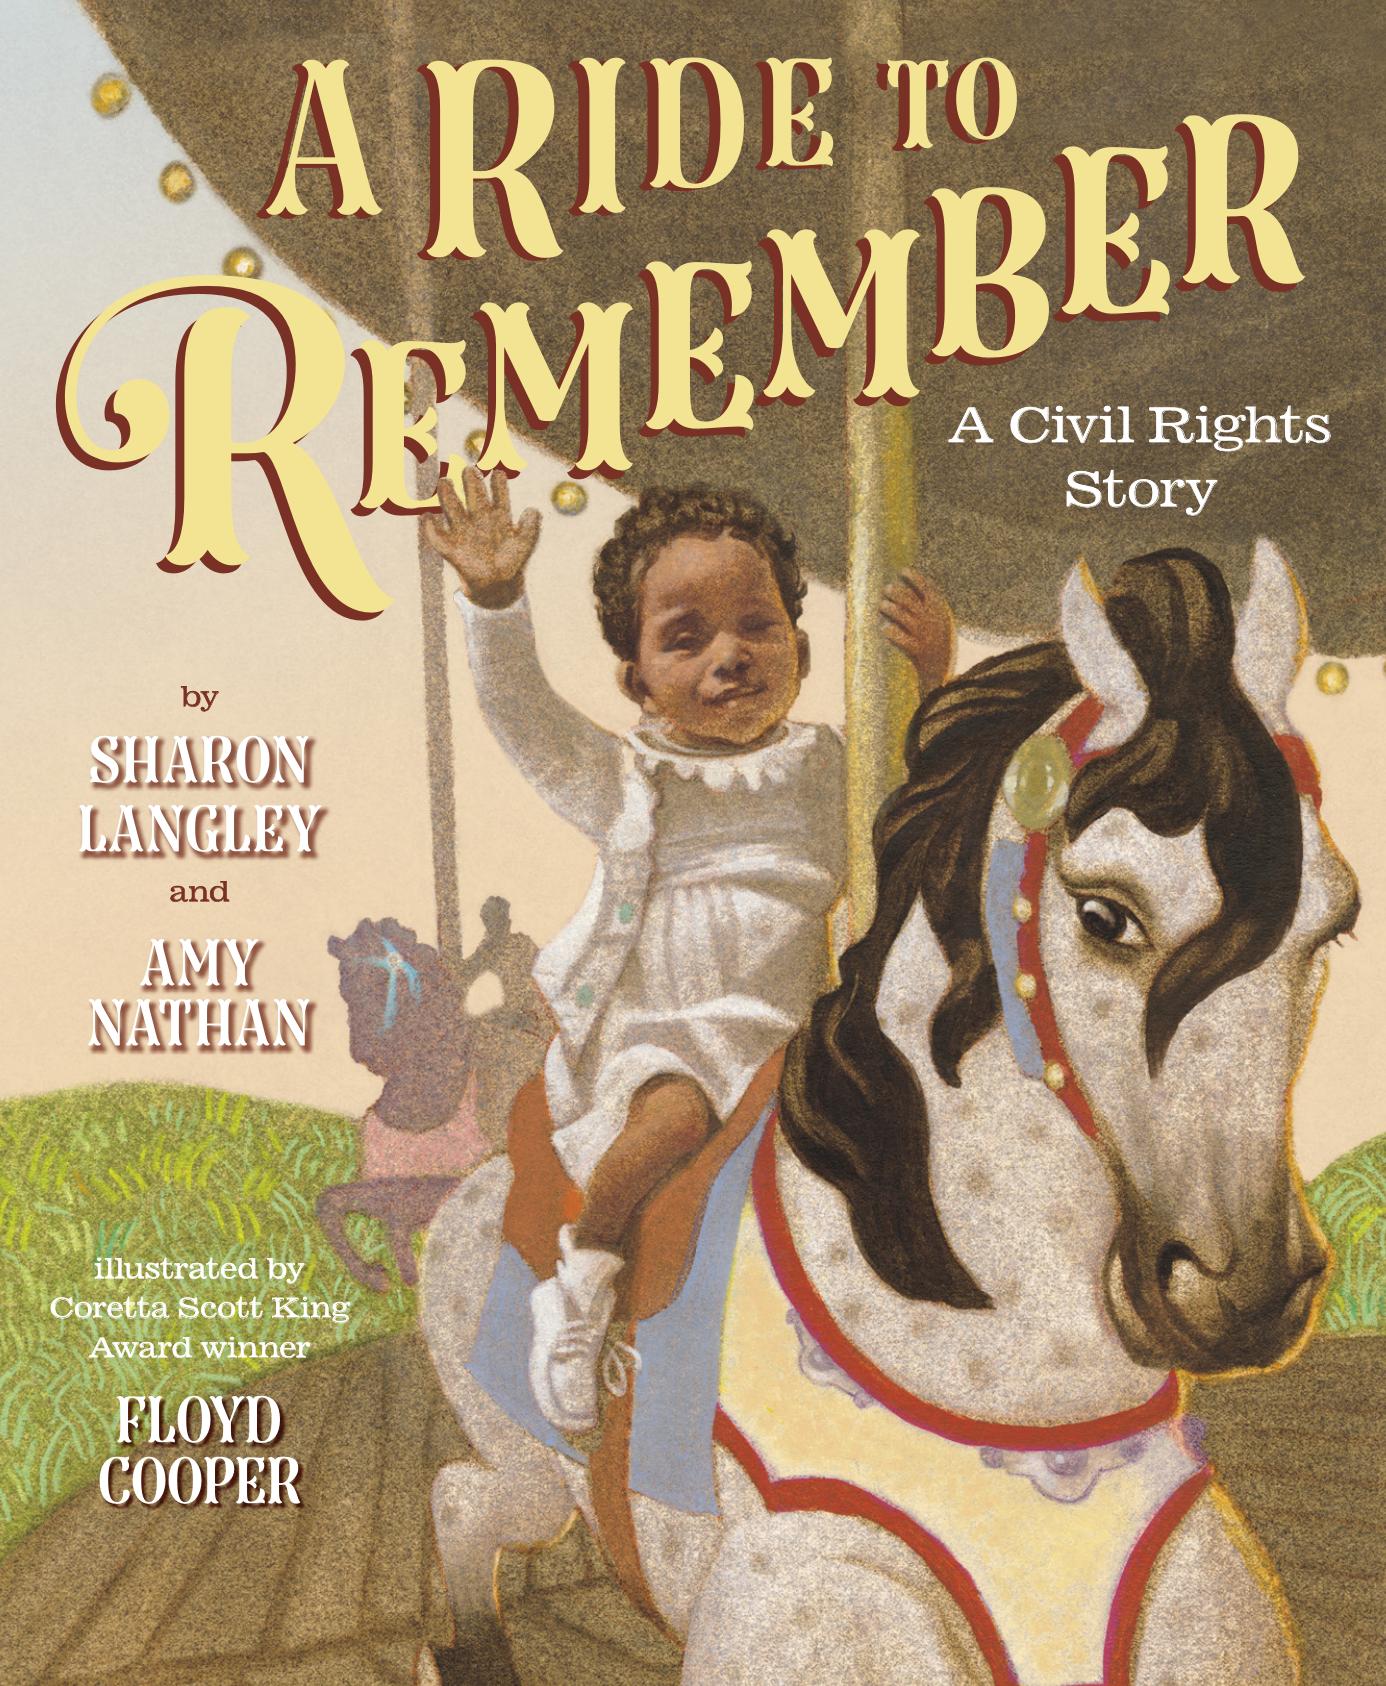 A Ride to Remember: a Civil Rights Story by Sharon Langley